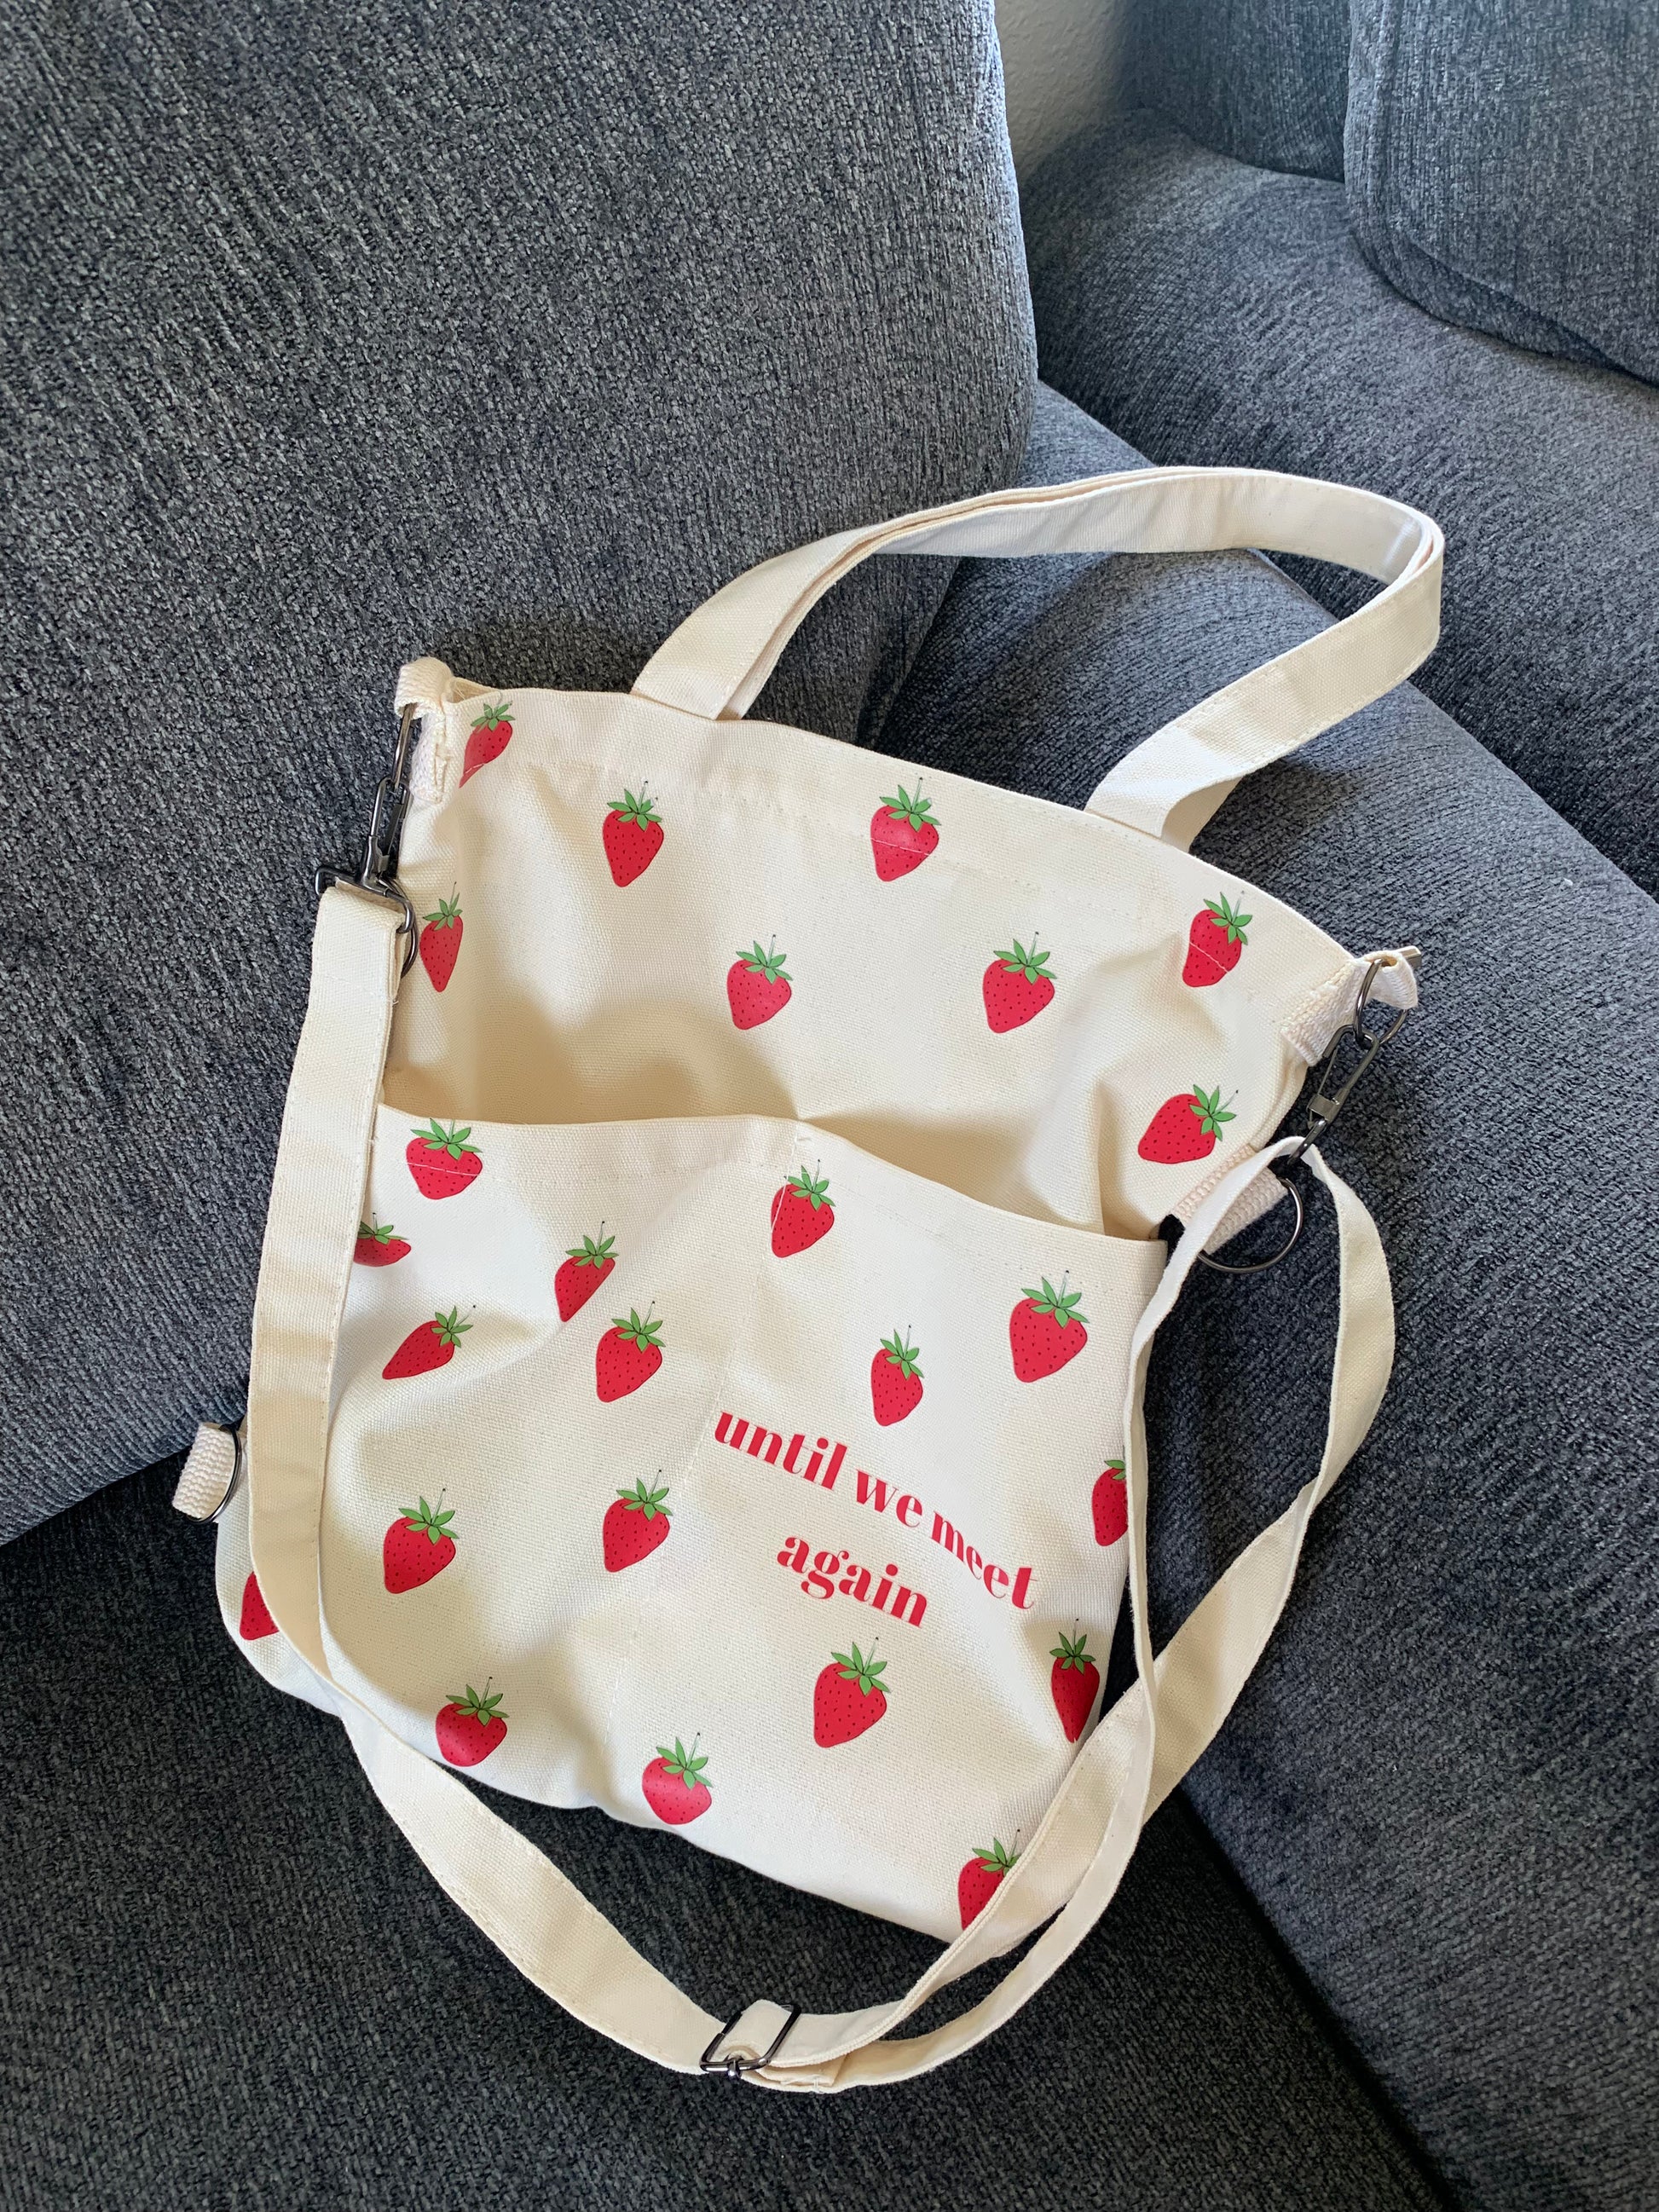 Japanese Cute Canvas Strawberry Tote Bag White Strawberry